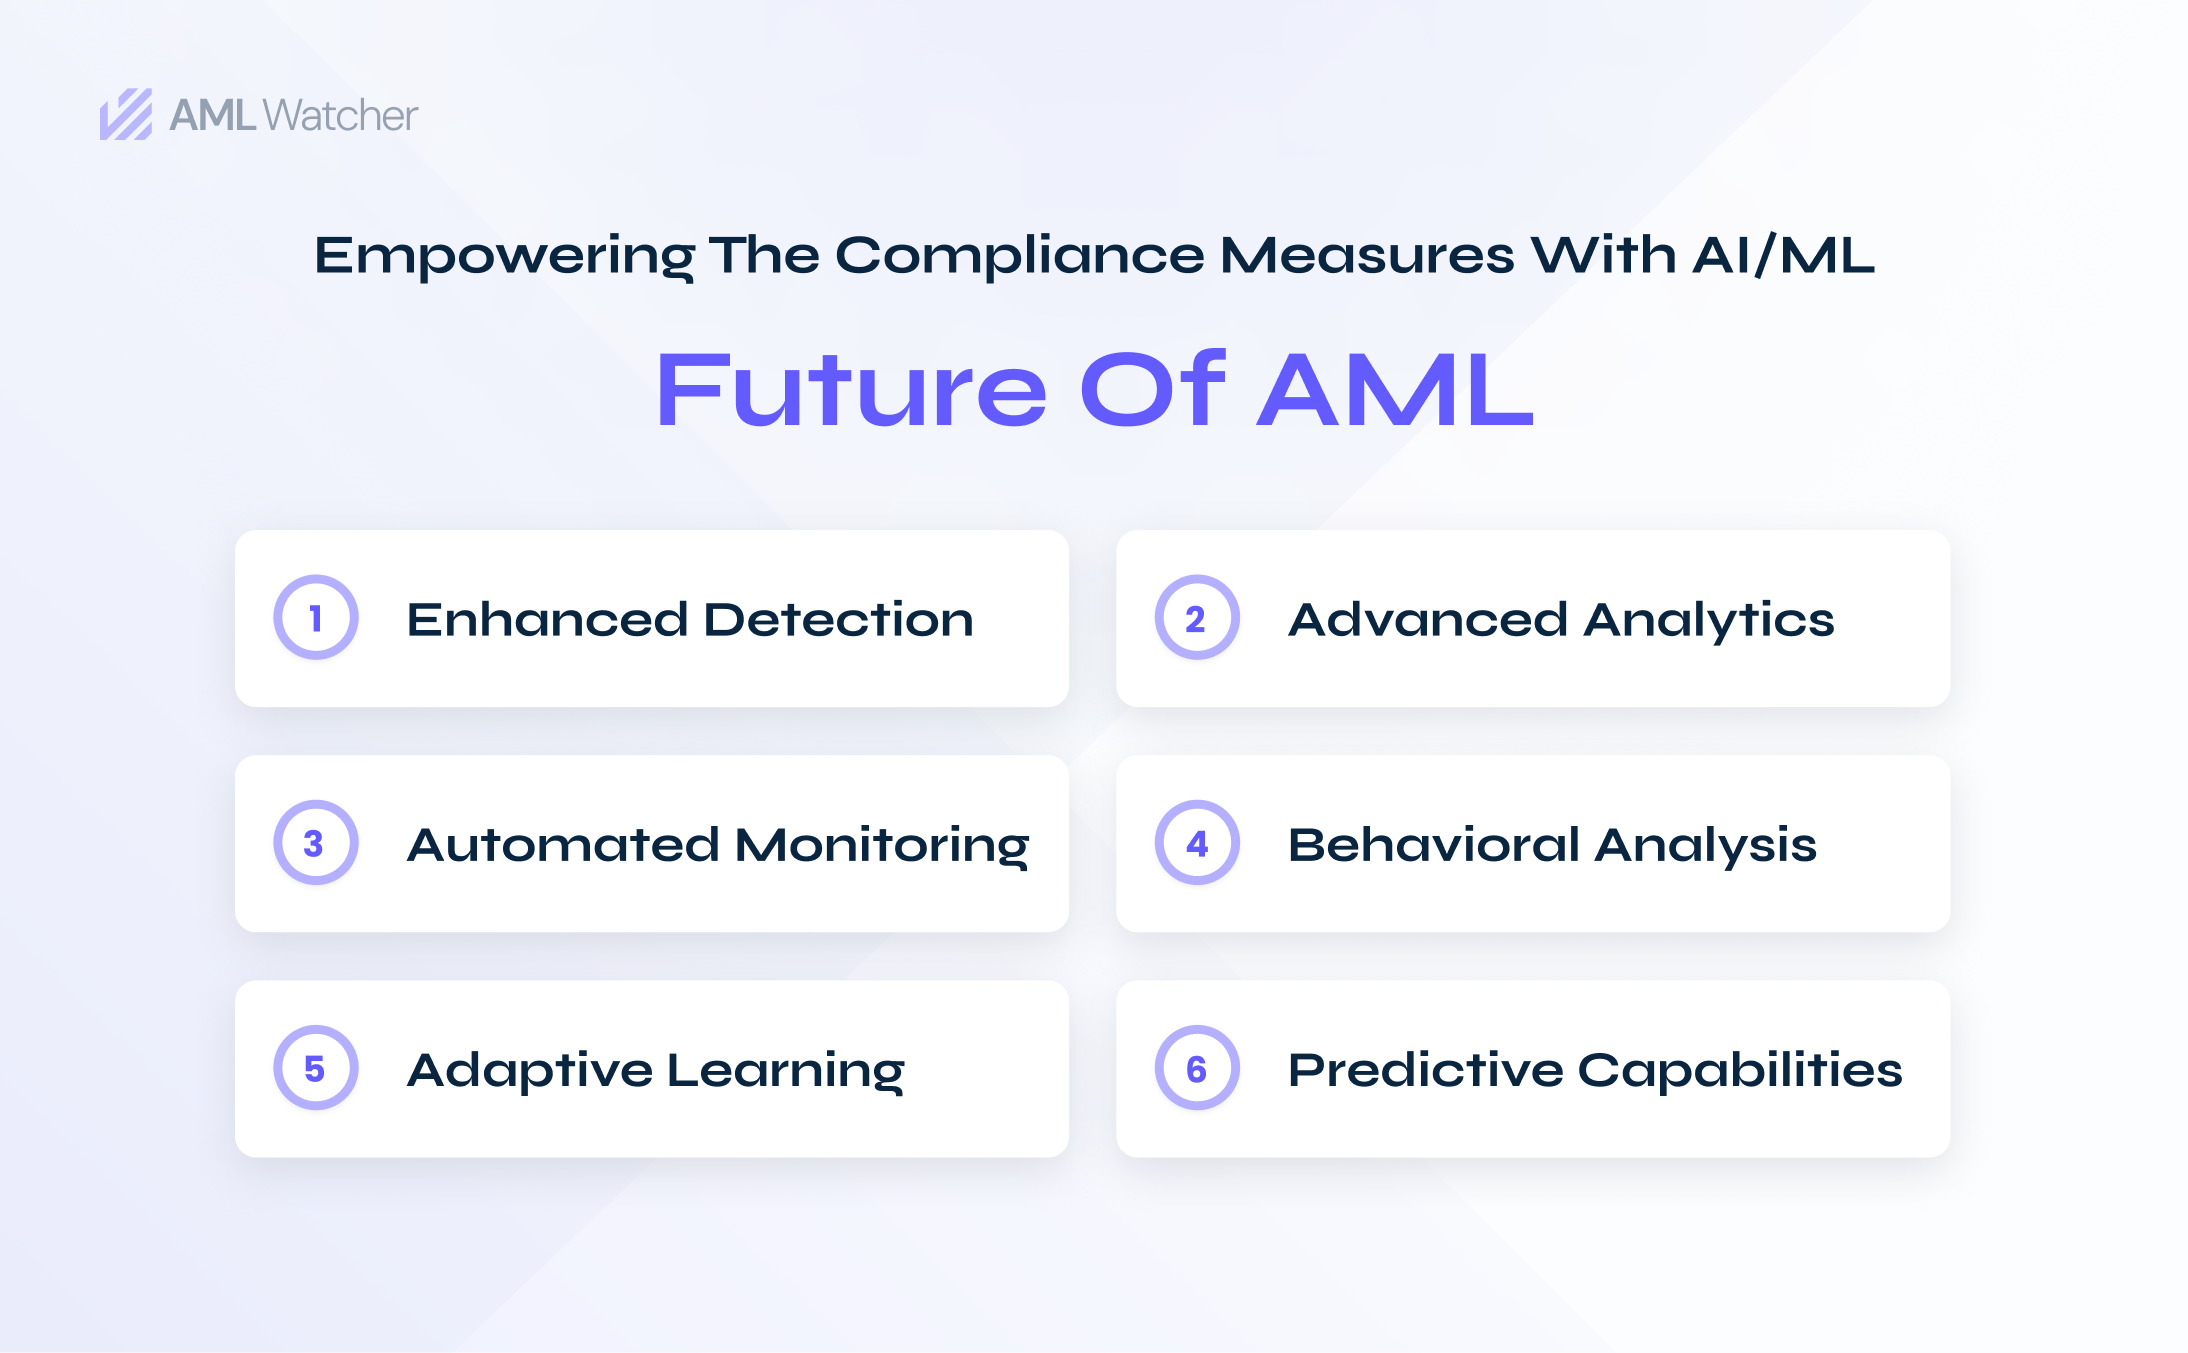 a brief overview of AI/ML use in AML compliance which brings enhanced scrutiny and streamlined compliance. The section also includes other key benefits such as automated monitoring, adaptive learning, predictive and advanced analytics.